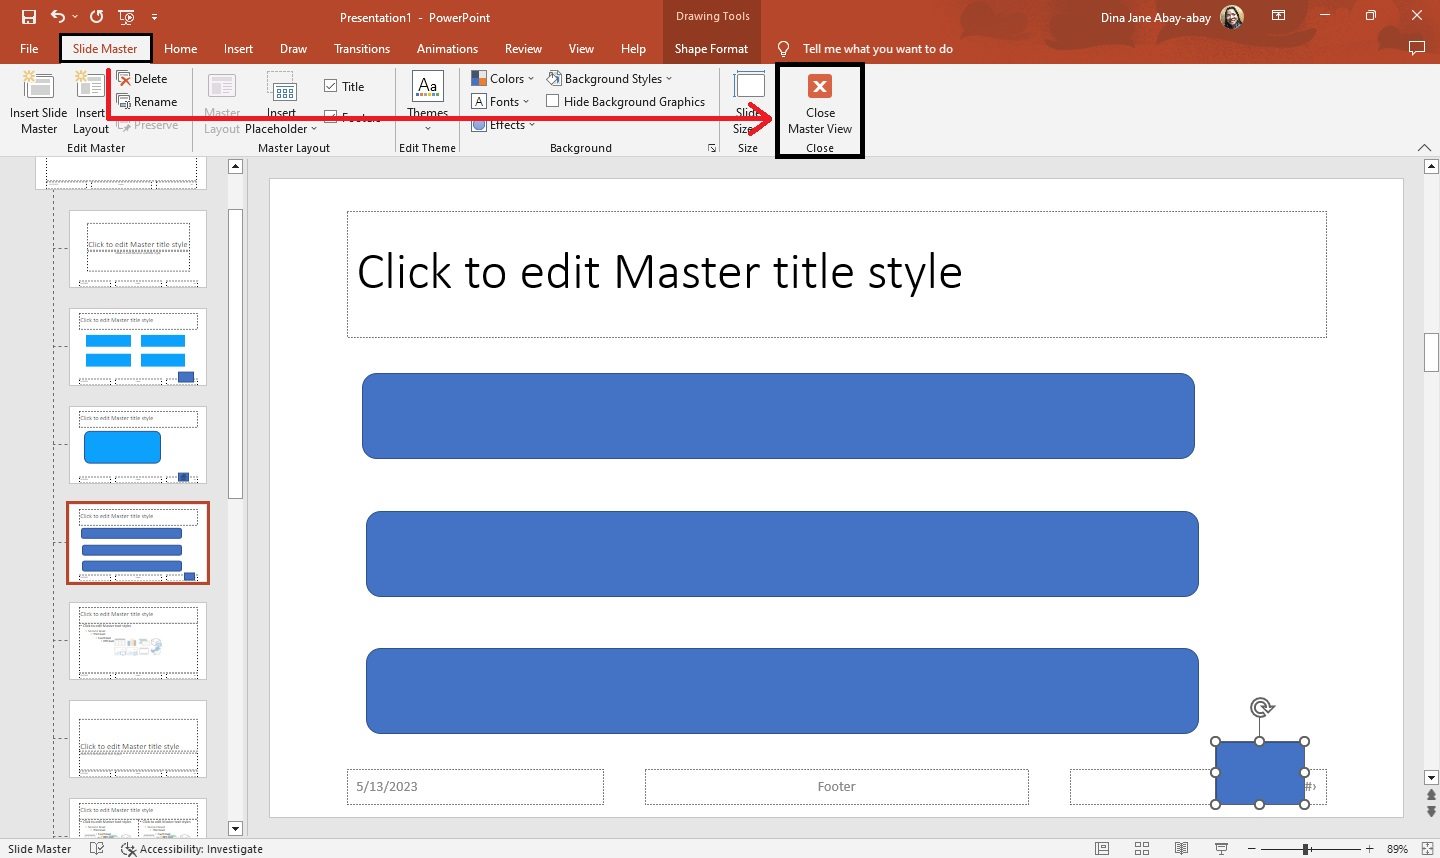 Then close your "Slide Master" tab and pressing the "X" button to close Master View.